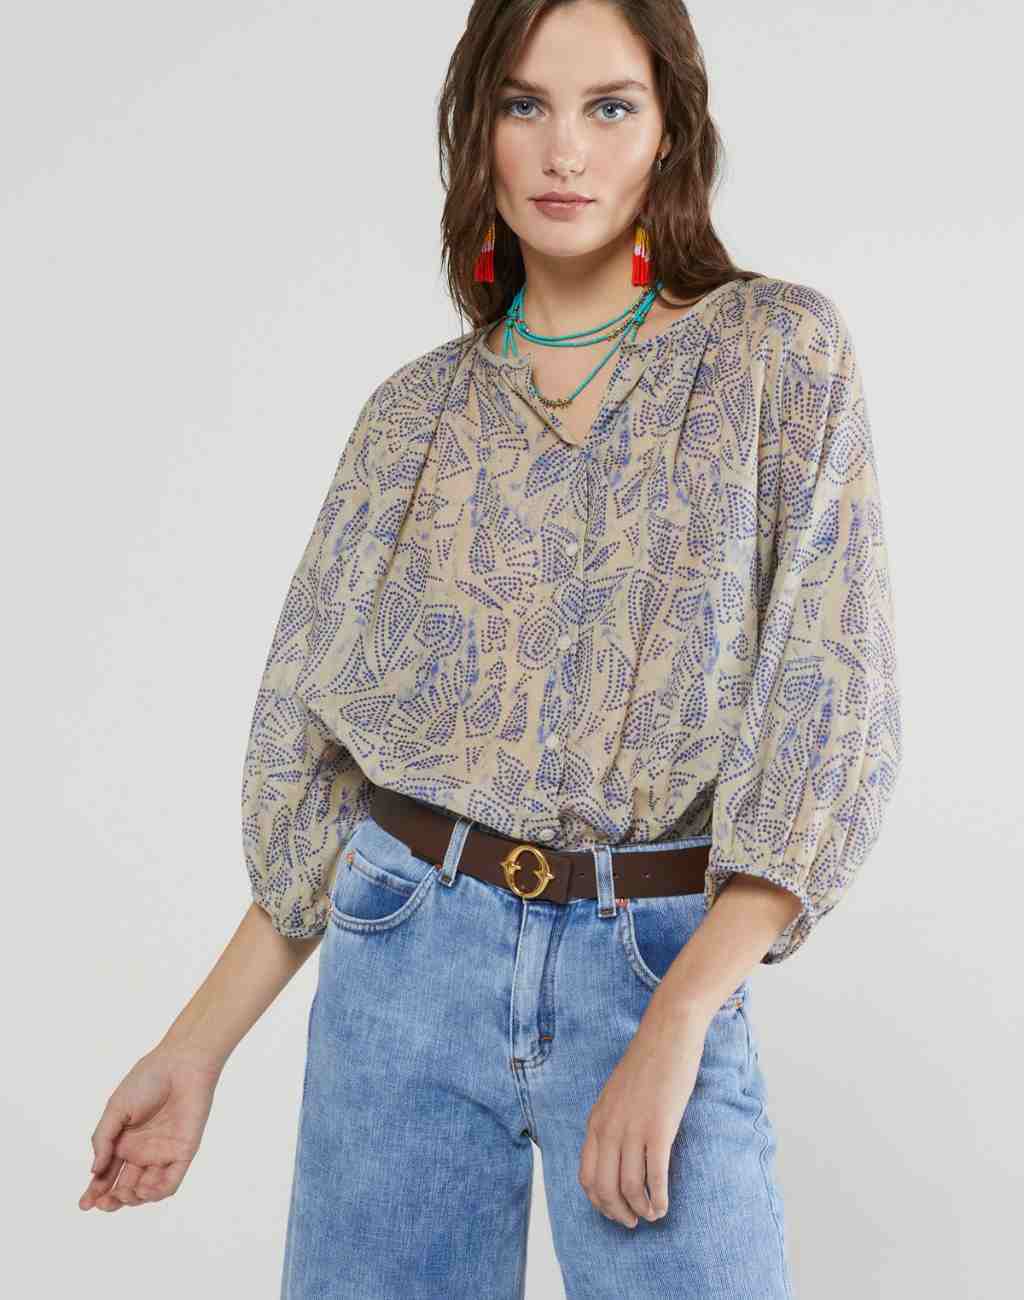 Print Top In Leightweight Cotton with Balloon Sleeves